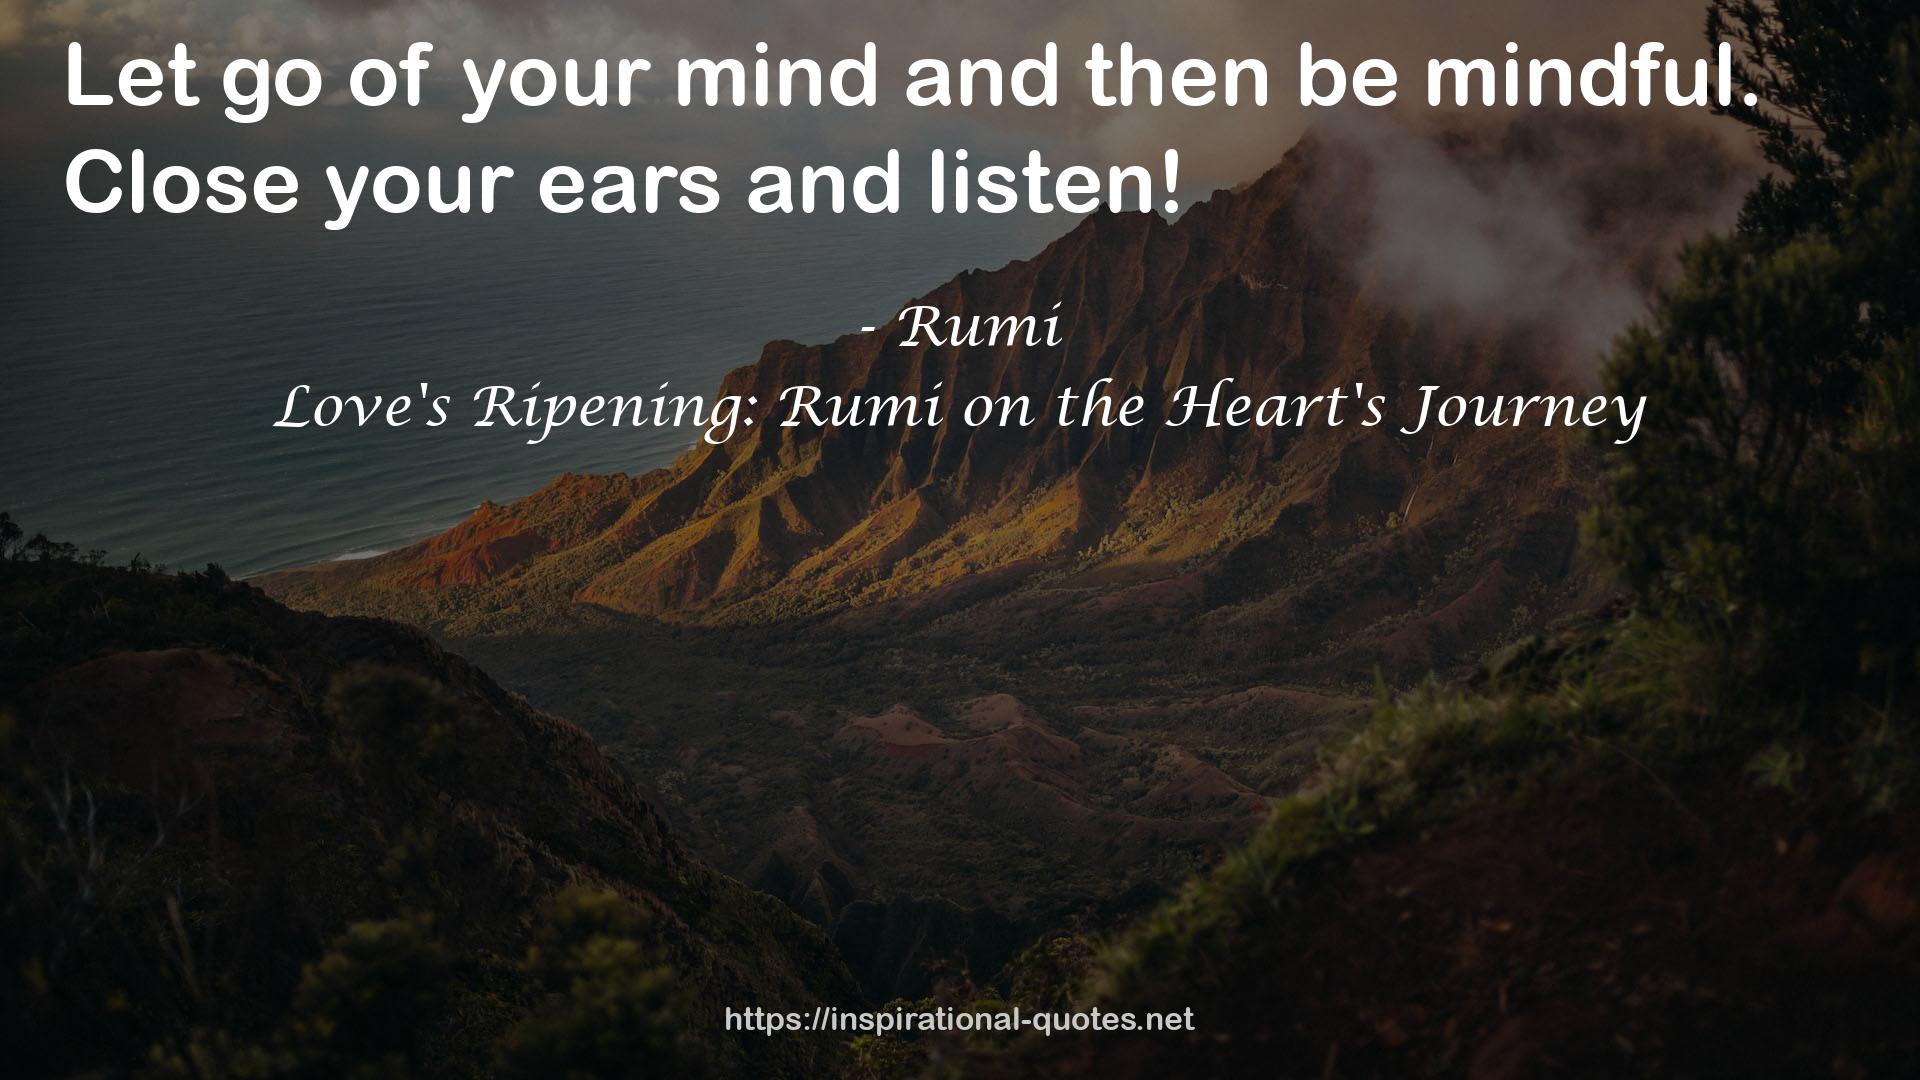 Love's Ripening: Rumi on the Heart's Journey QUOTES